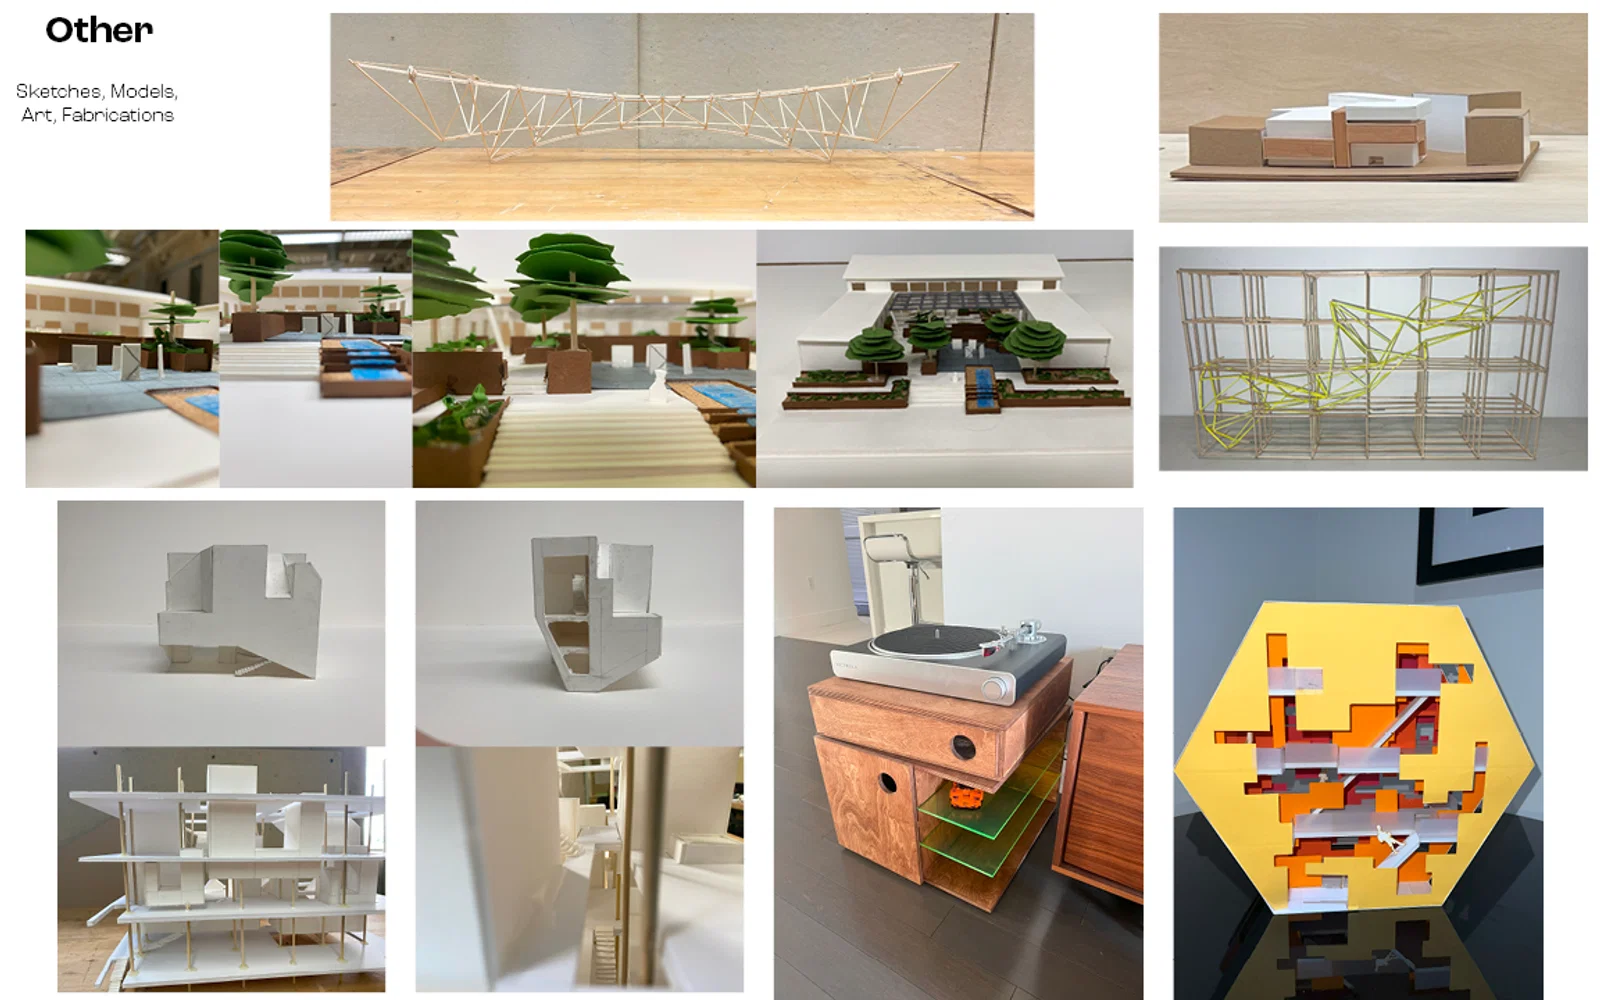 This is pictures of my models. There a bridge model, a small model of studio 5, images of Perloff Hall project, studio 1 models, hexagon model, and my fabrications cabinet.